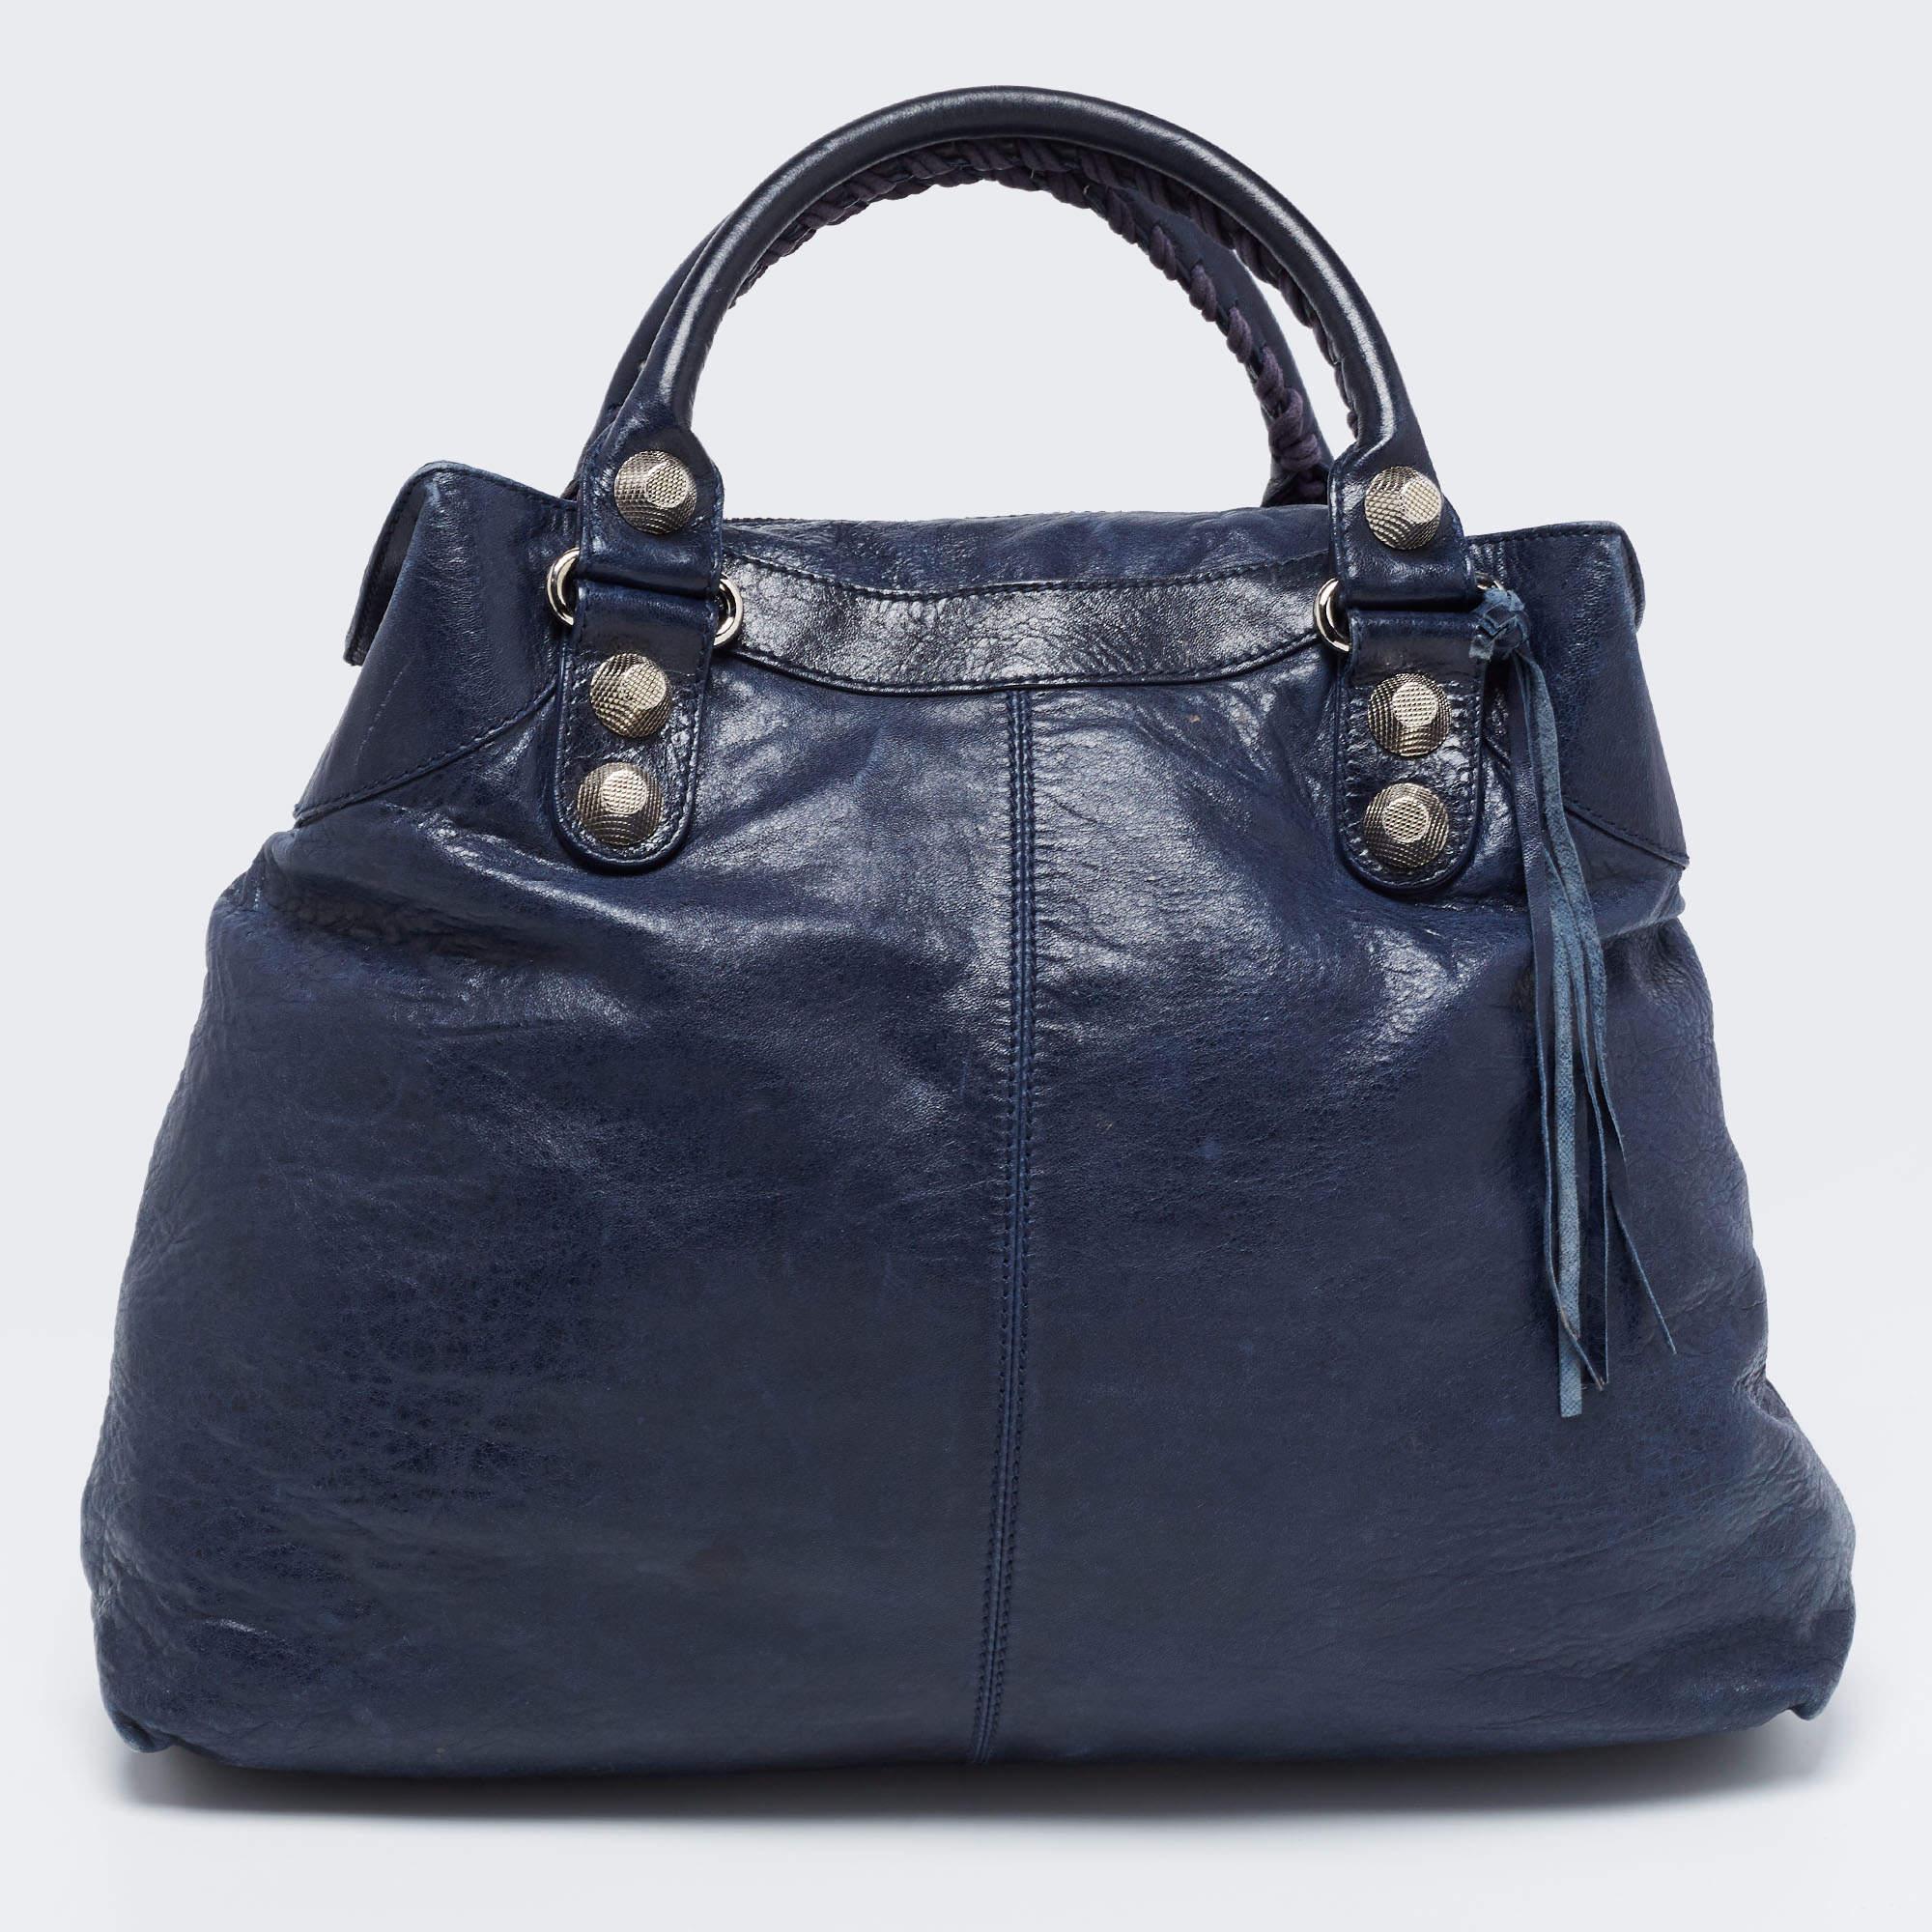 Quite popular bag among celebrities, this GSH Brief tote by Balenciaga will never leave you unnoticed! It is crafted from marine leather and is accented with oversized signature metal buckle and stud details at the front. It comes with an exterior